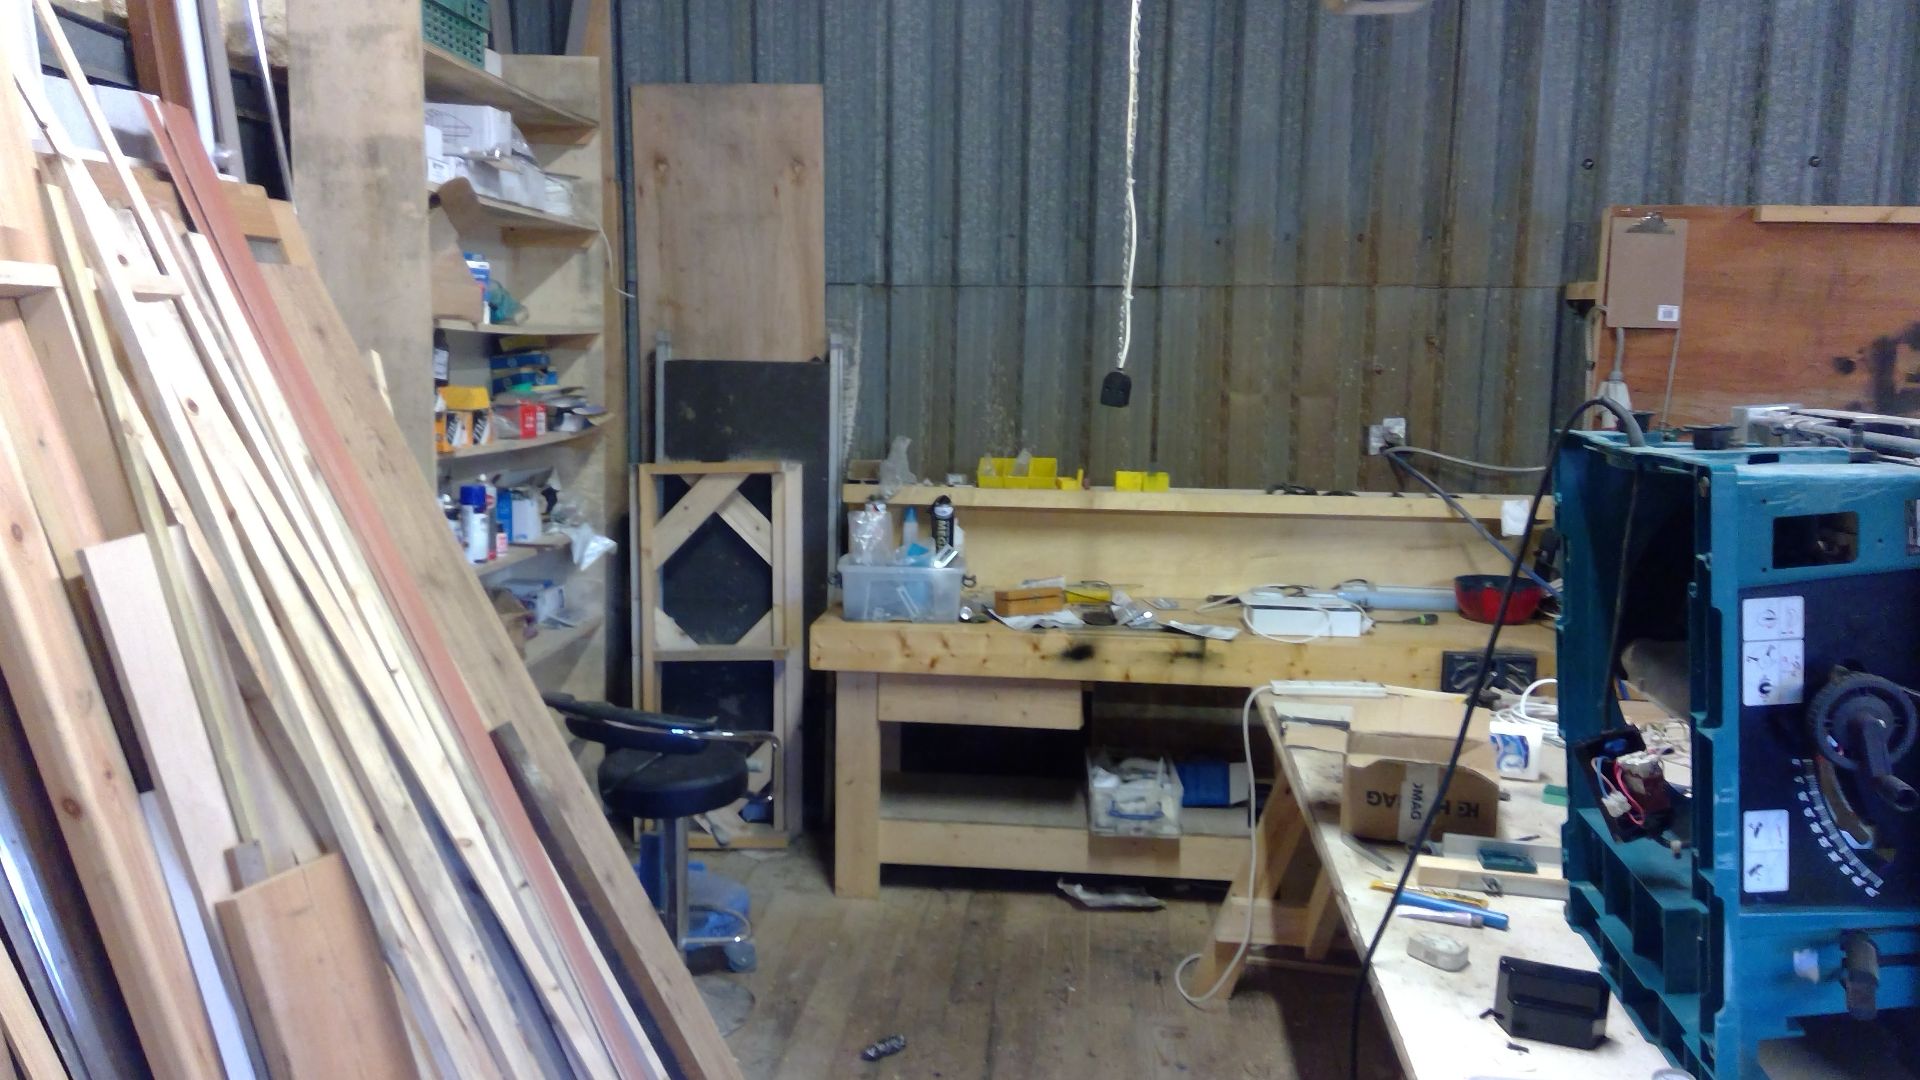 Contents of workshop to include timber, benches, tools, cable, extractor units and consumables - Image 3 of 3